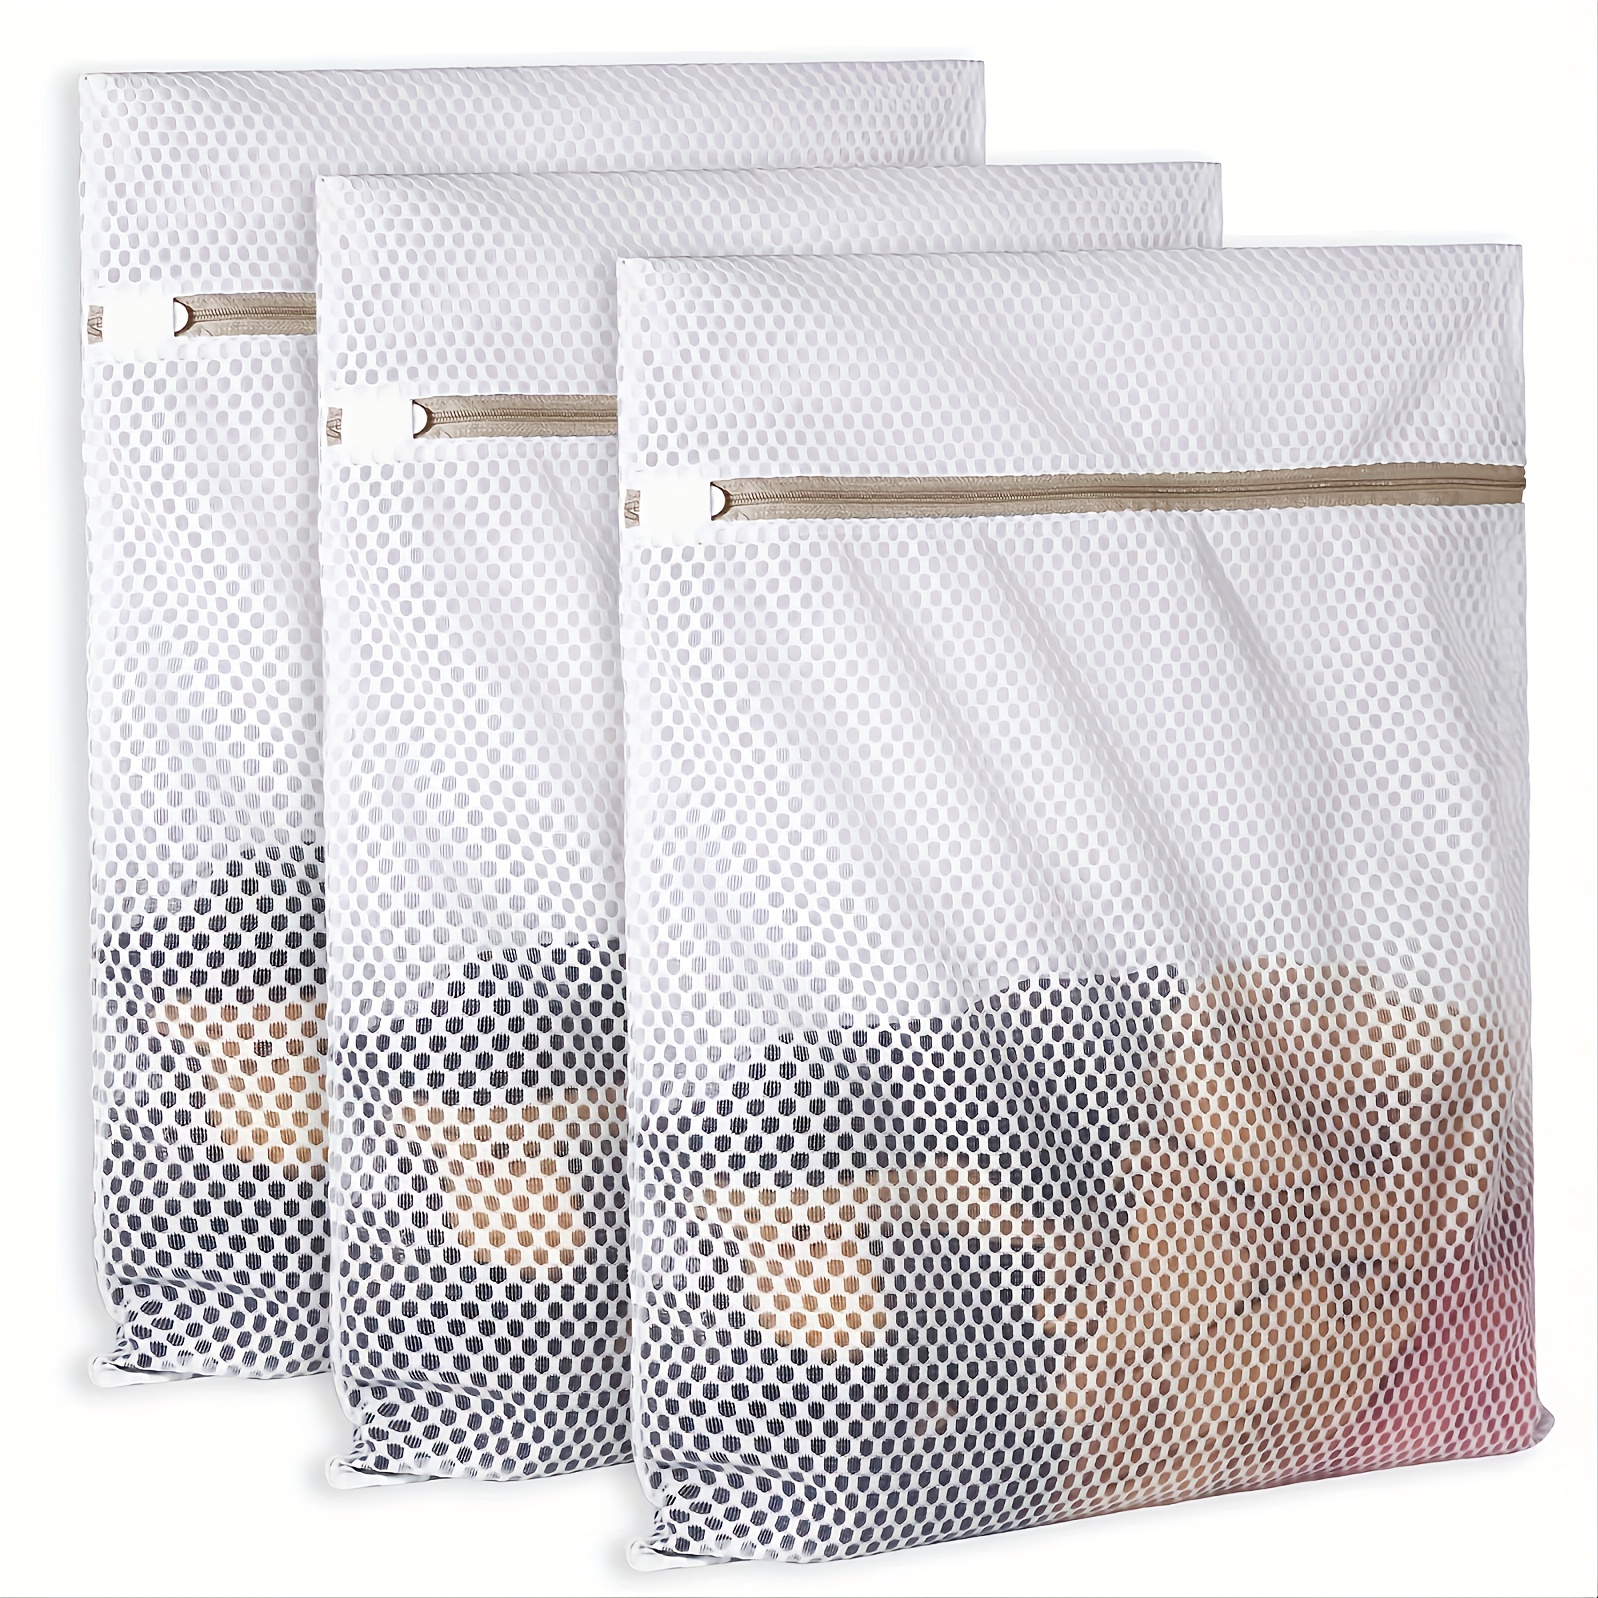 3-Pack of Premium Bra Wash Bags for Delicates - Double-Wall Protection  Laundry Bags are Best for Protecting Delicates, Lingerie, and Socks